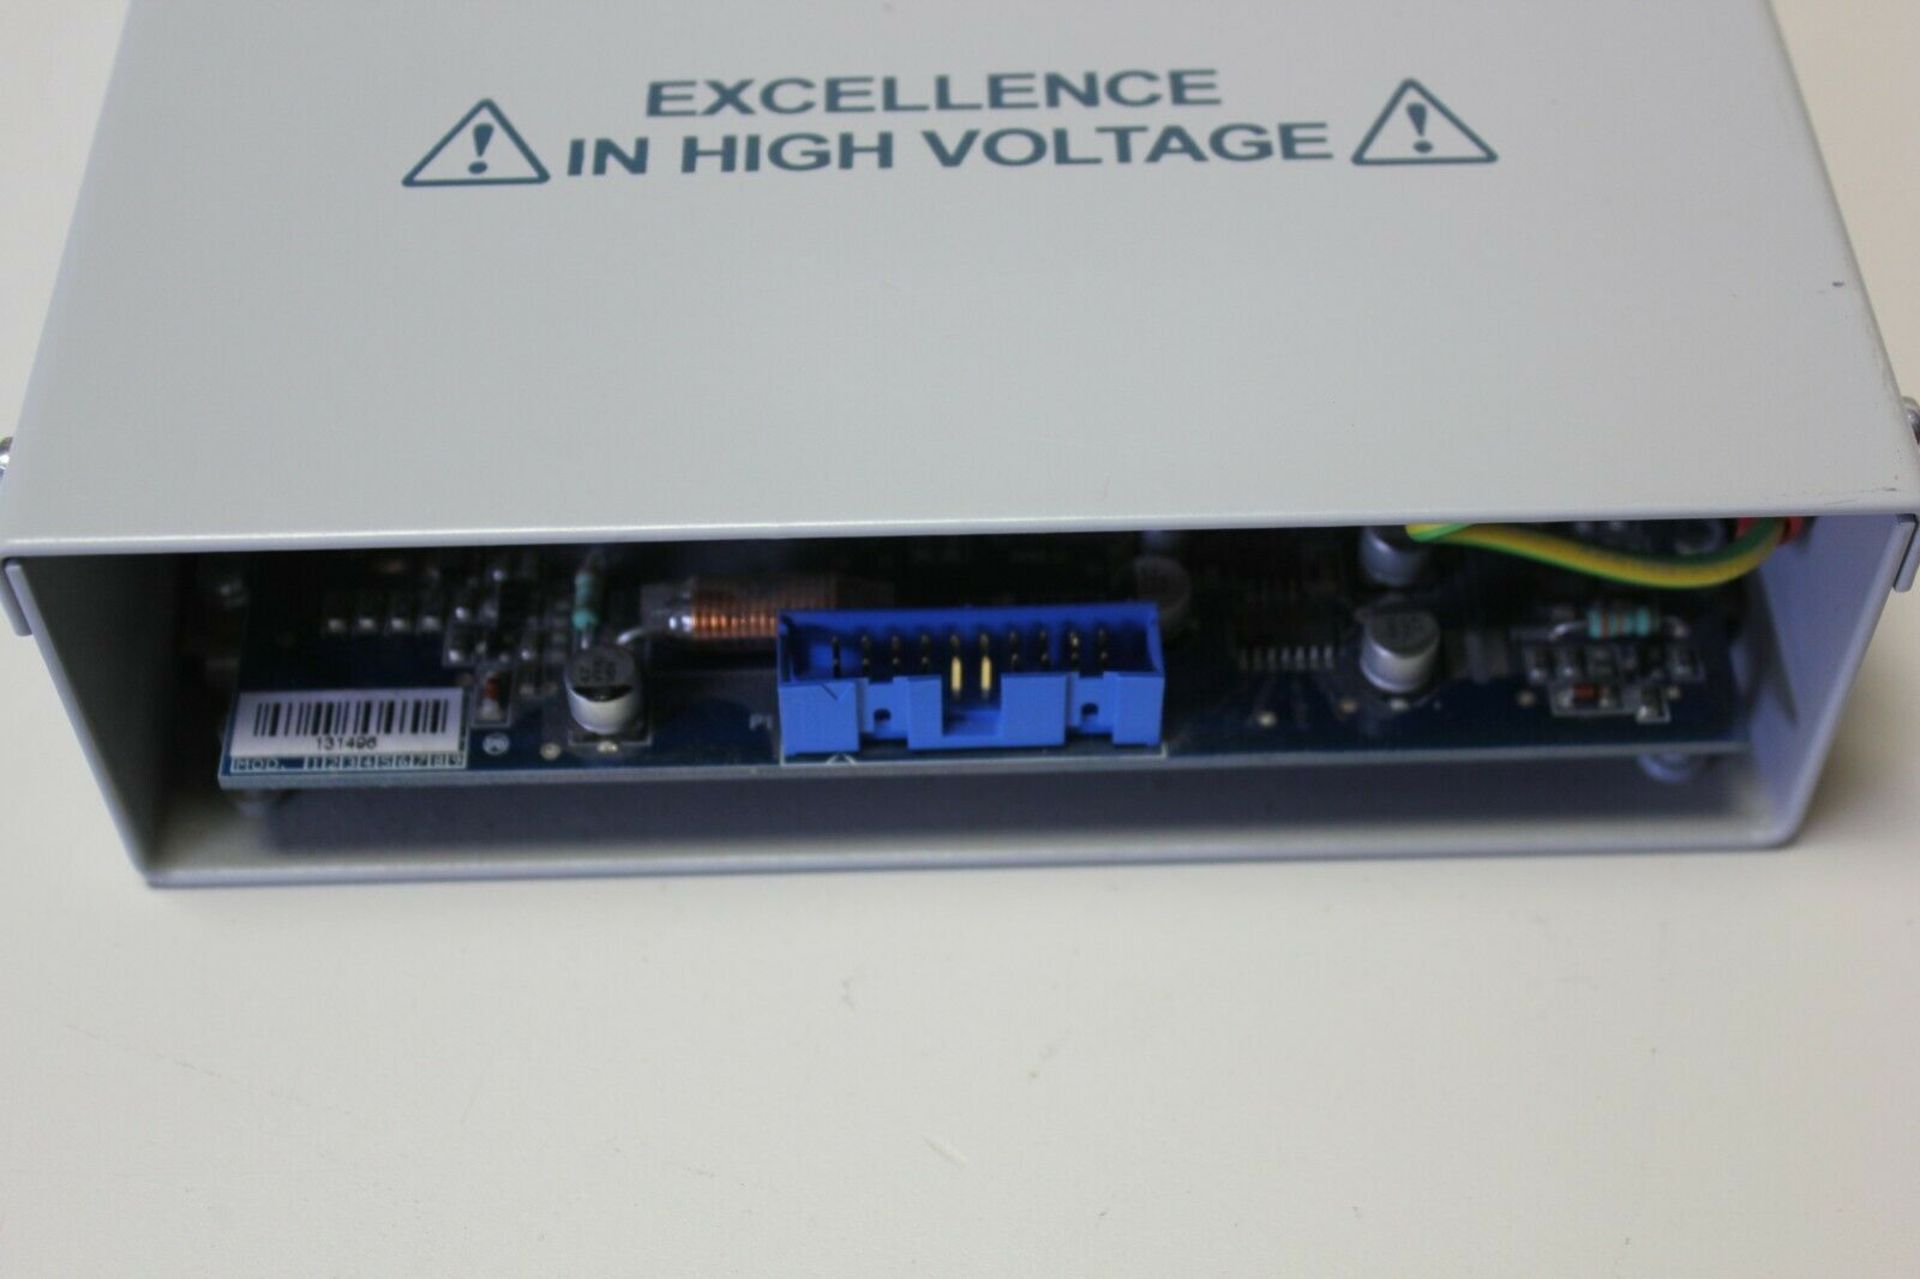 APPLIED KILOVOLTS 24V HIGH VOLTAGE POWER SUPPLY - Image 3 of 6